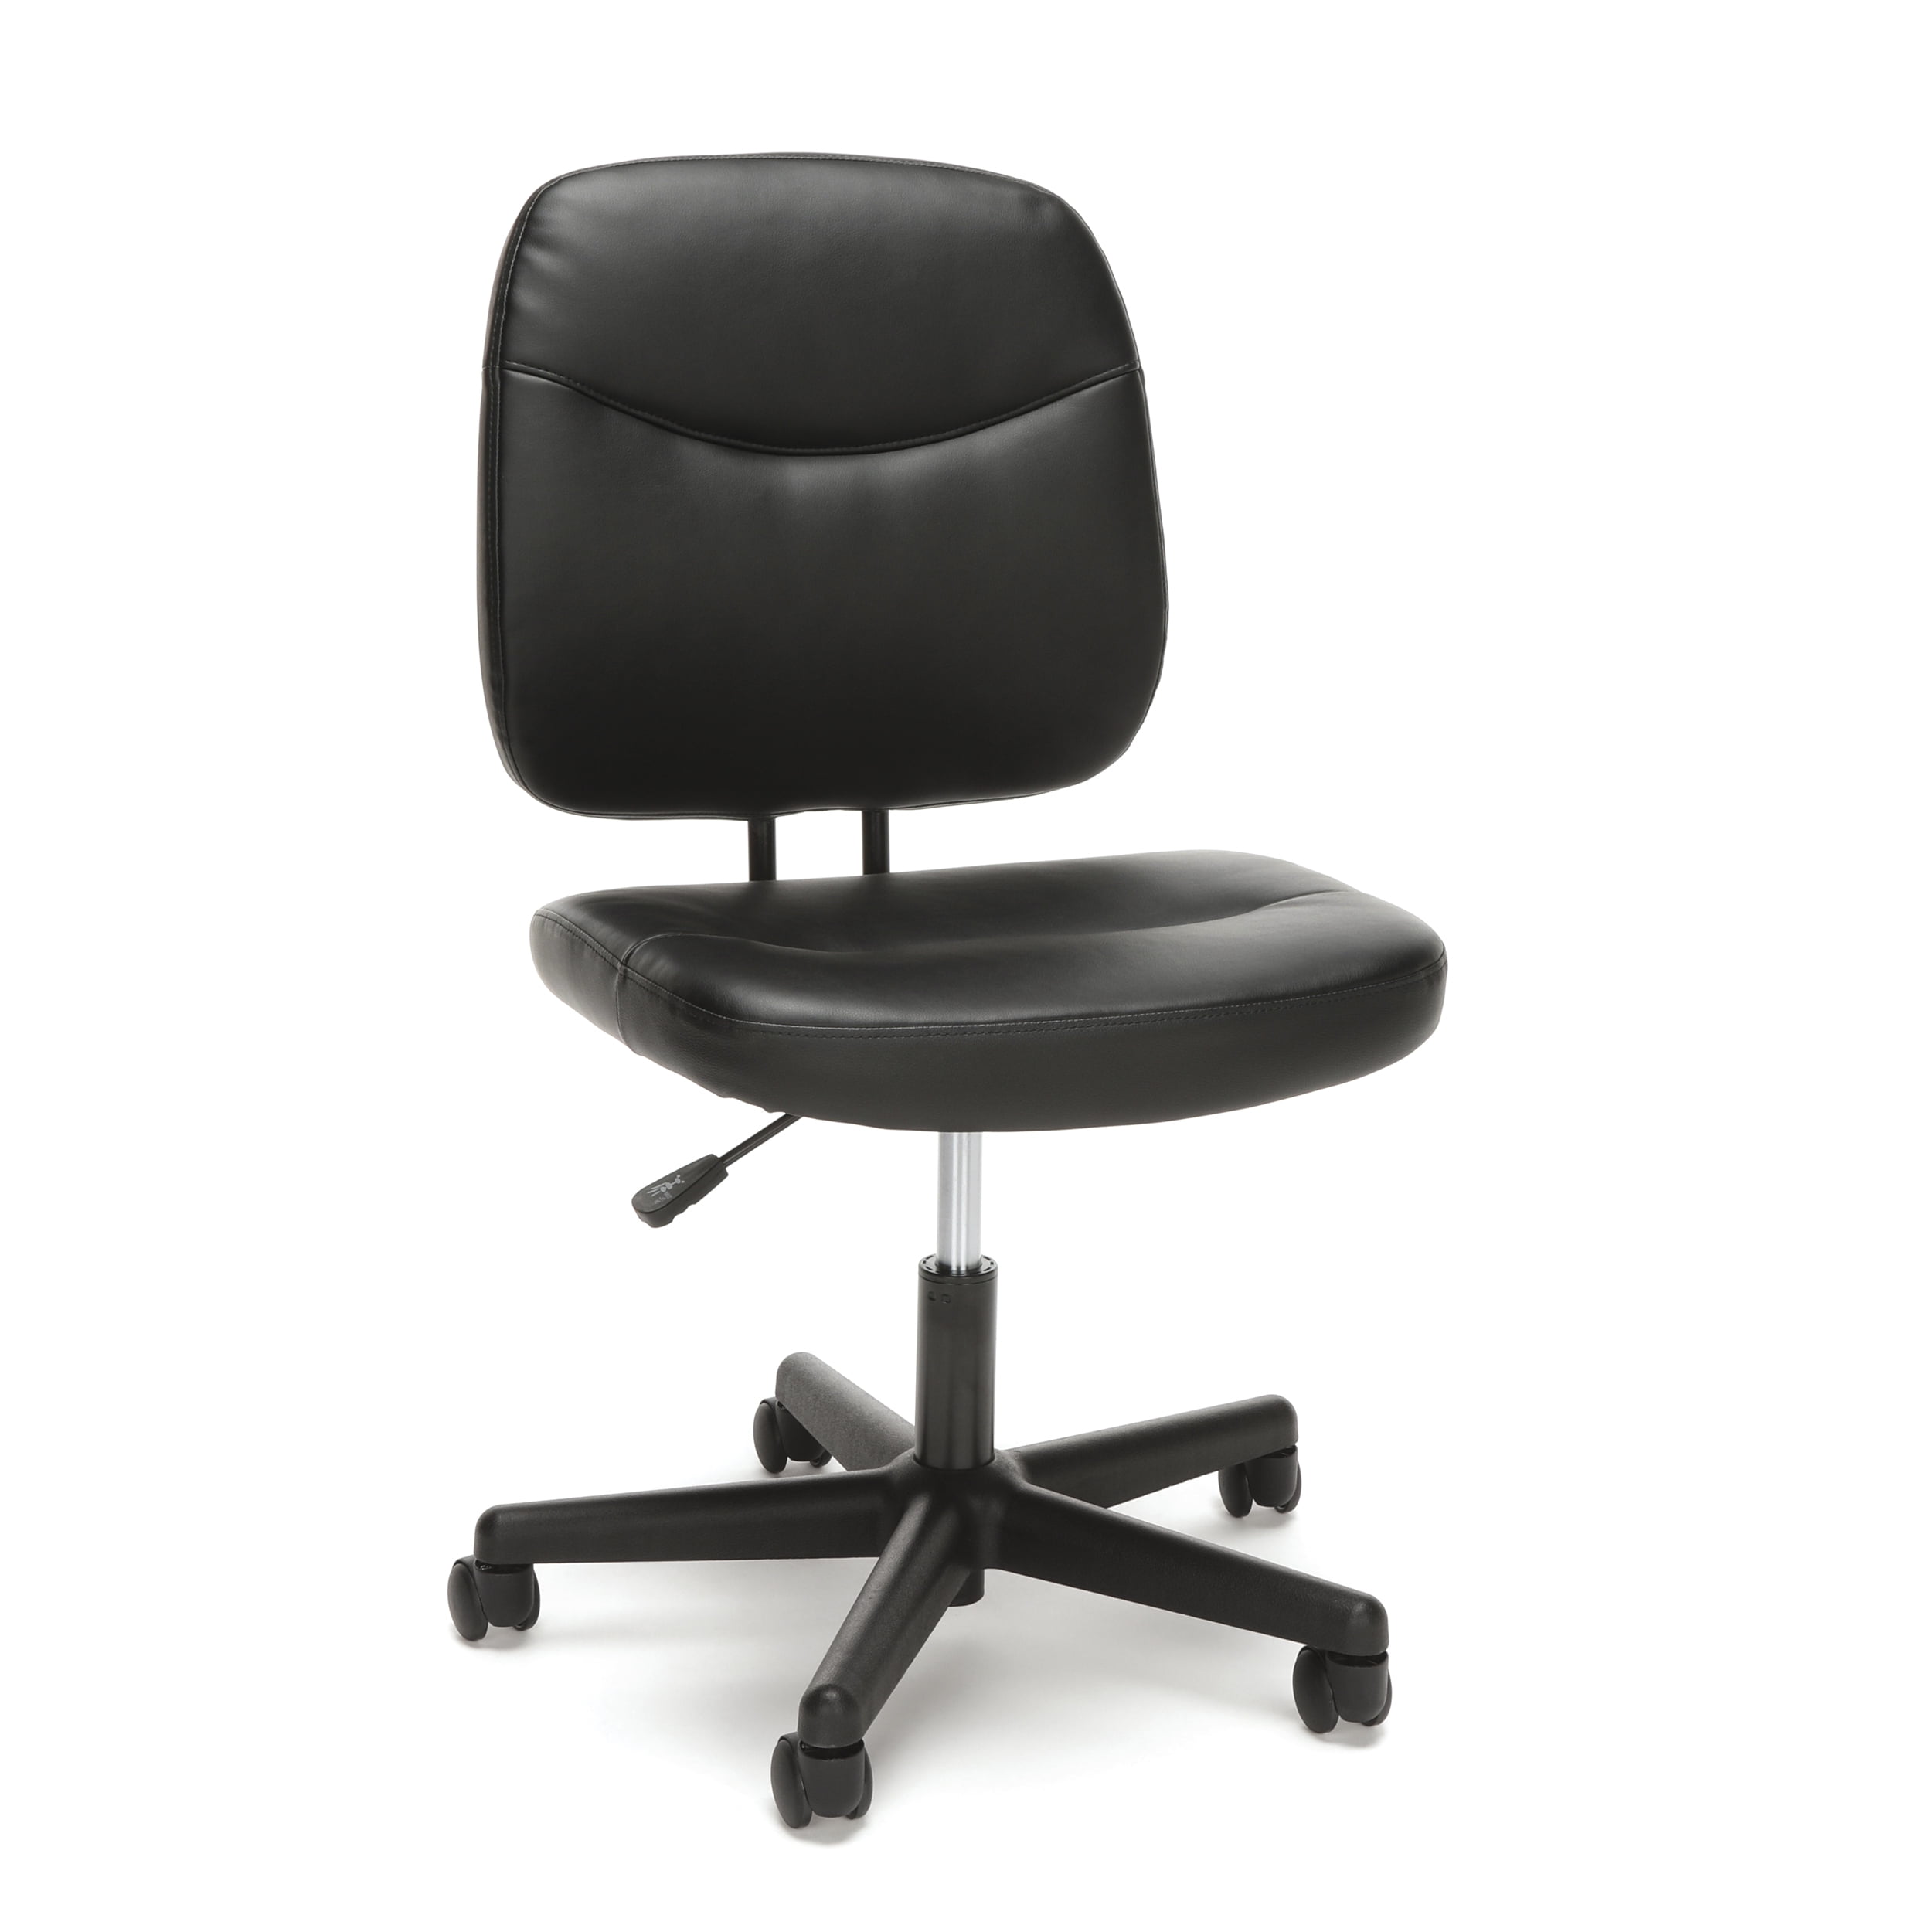 Armless Black Leather Adjustable Seat Height Executive Swivel Desk Chair 